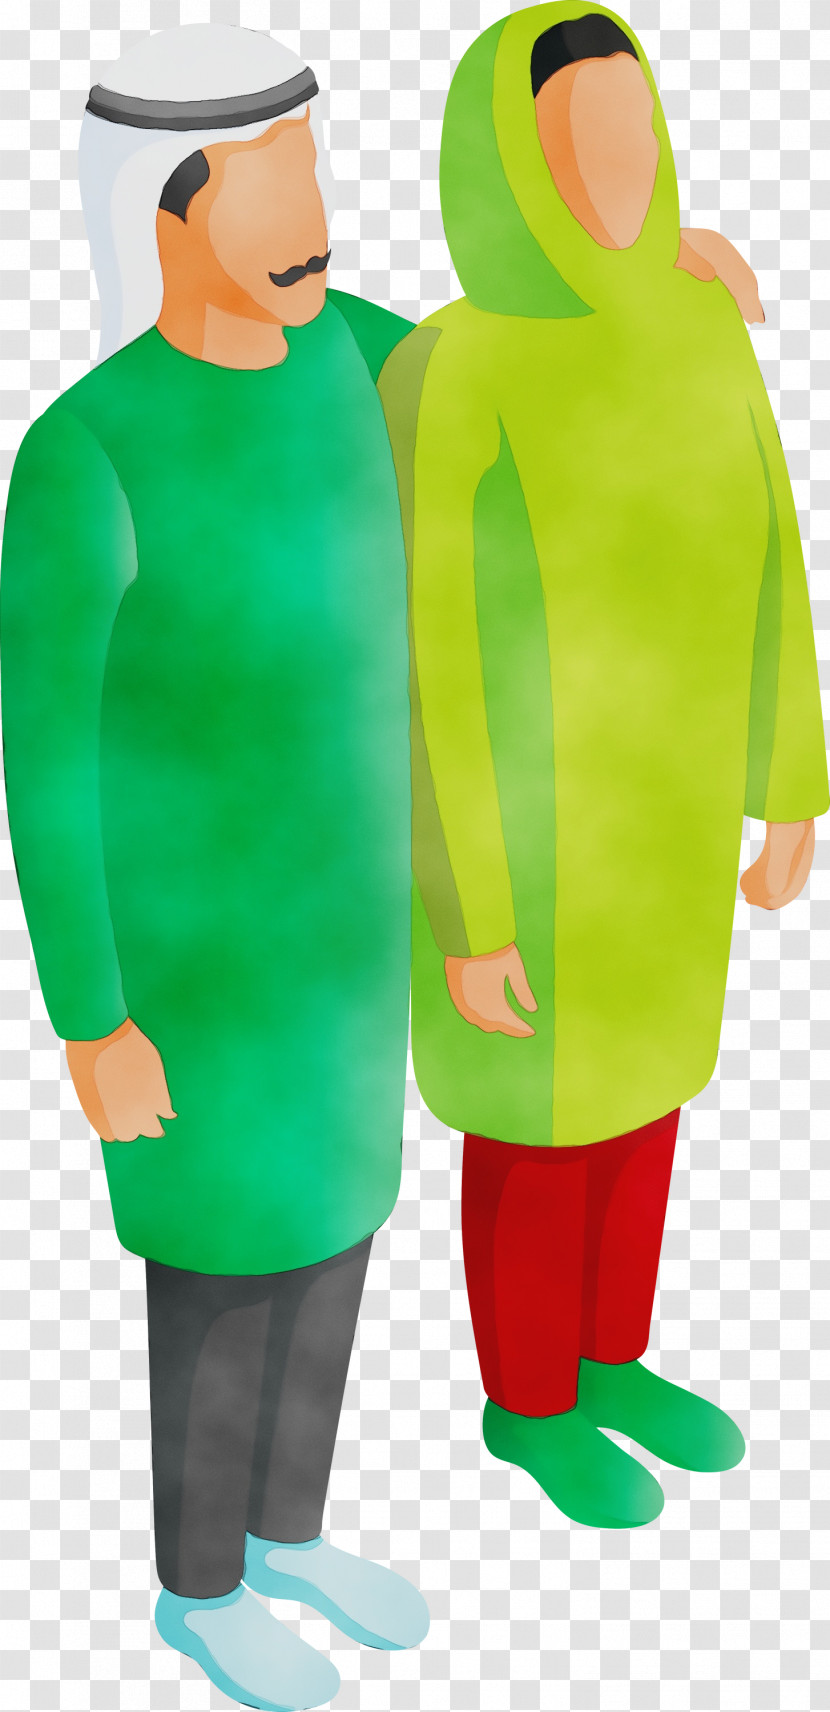 Green Clothing Costume Outerwear Sleeve Transparent PNG